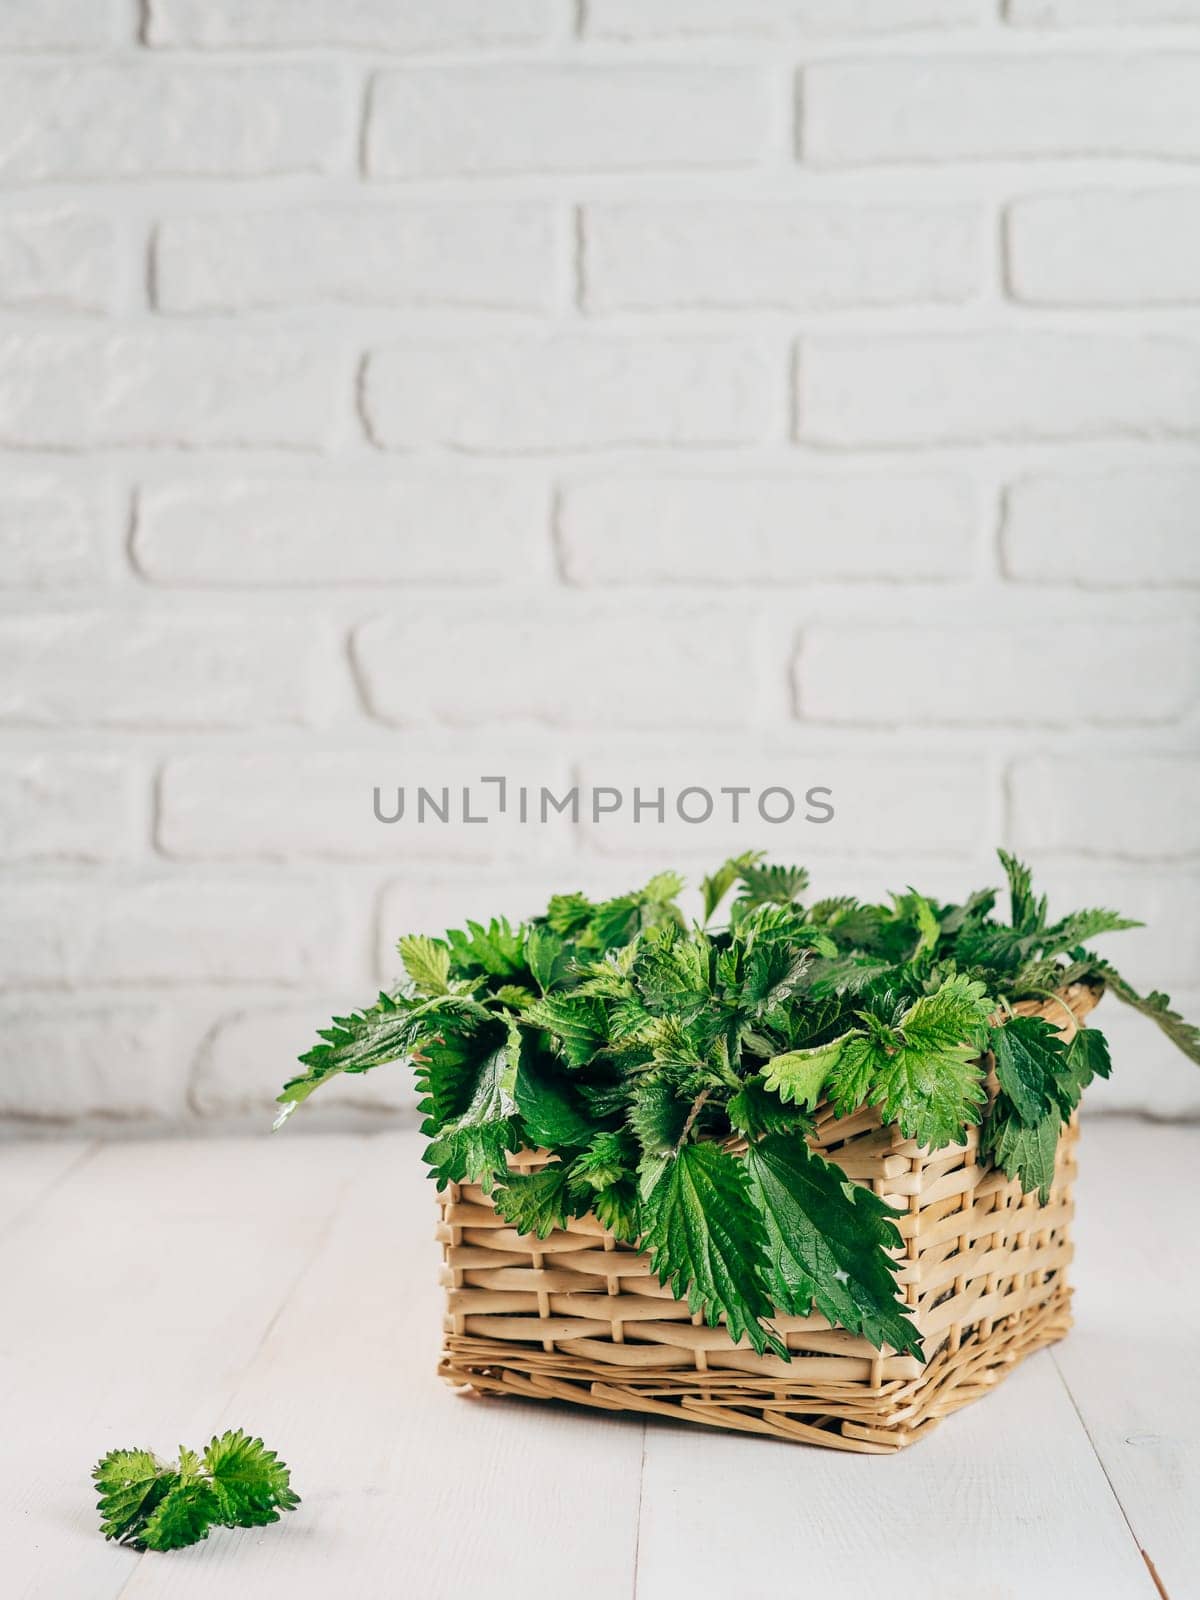 Basket of fresh stinging nettle leaves on wooden table by fascinadora